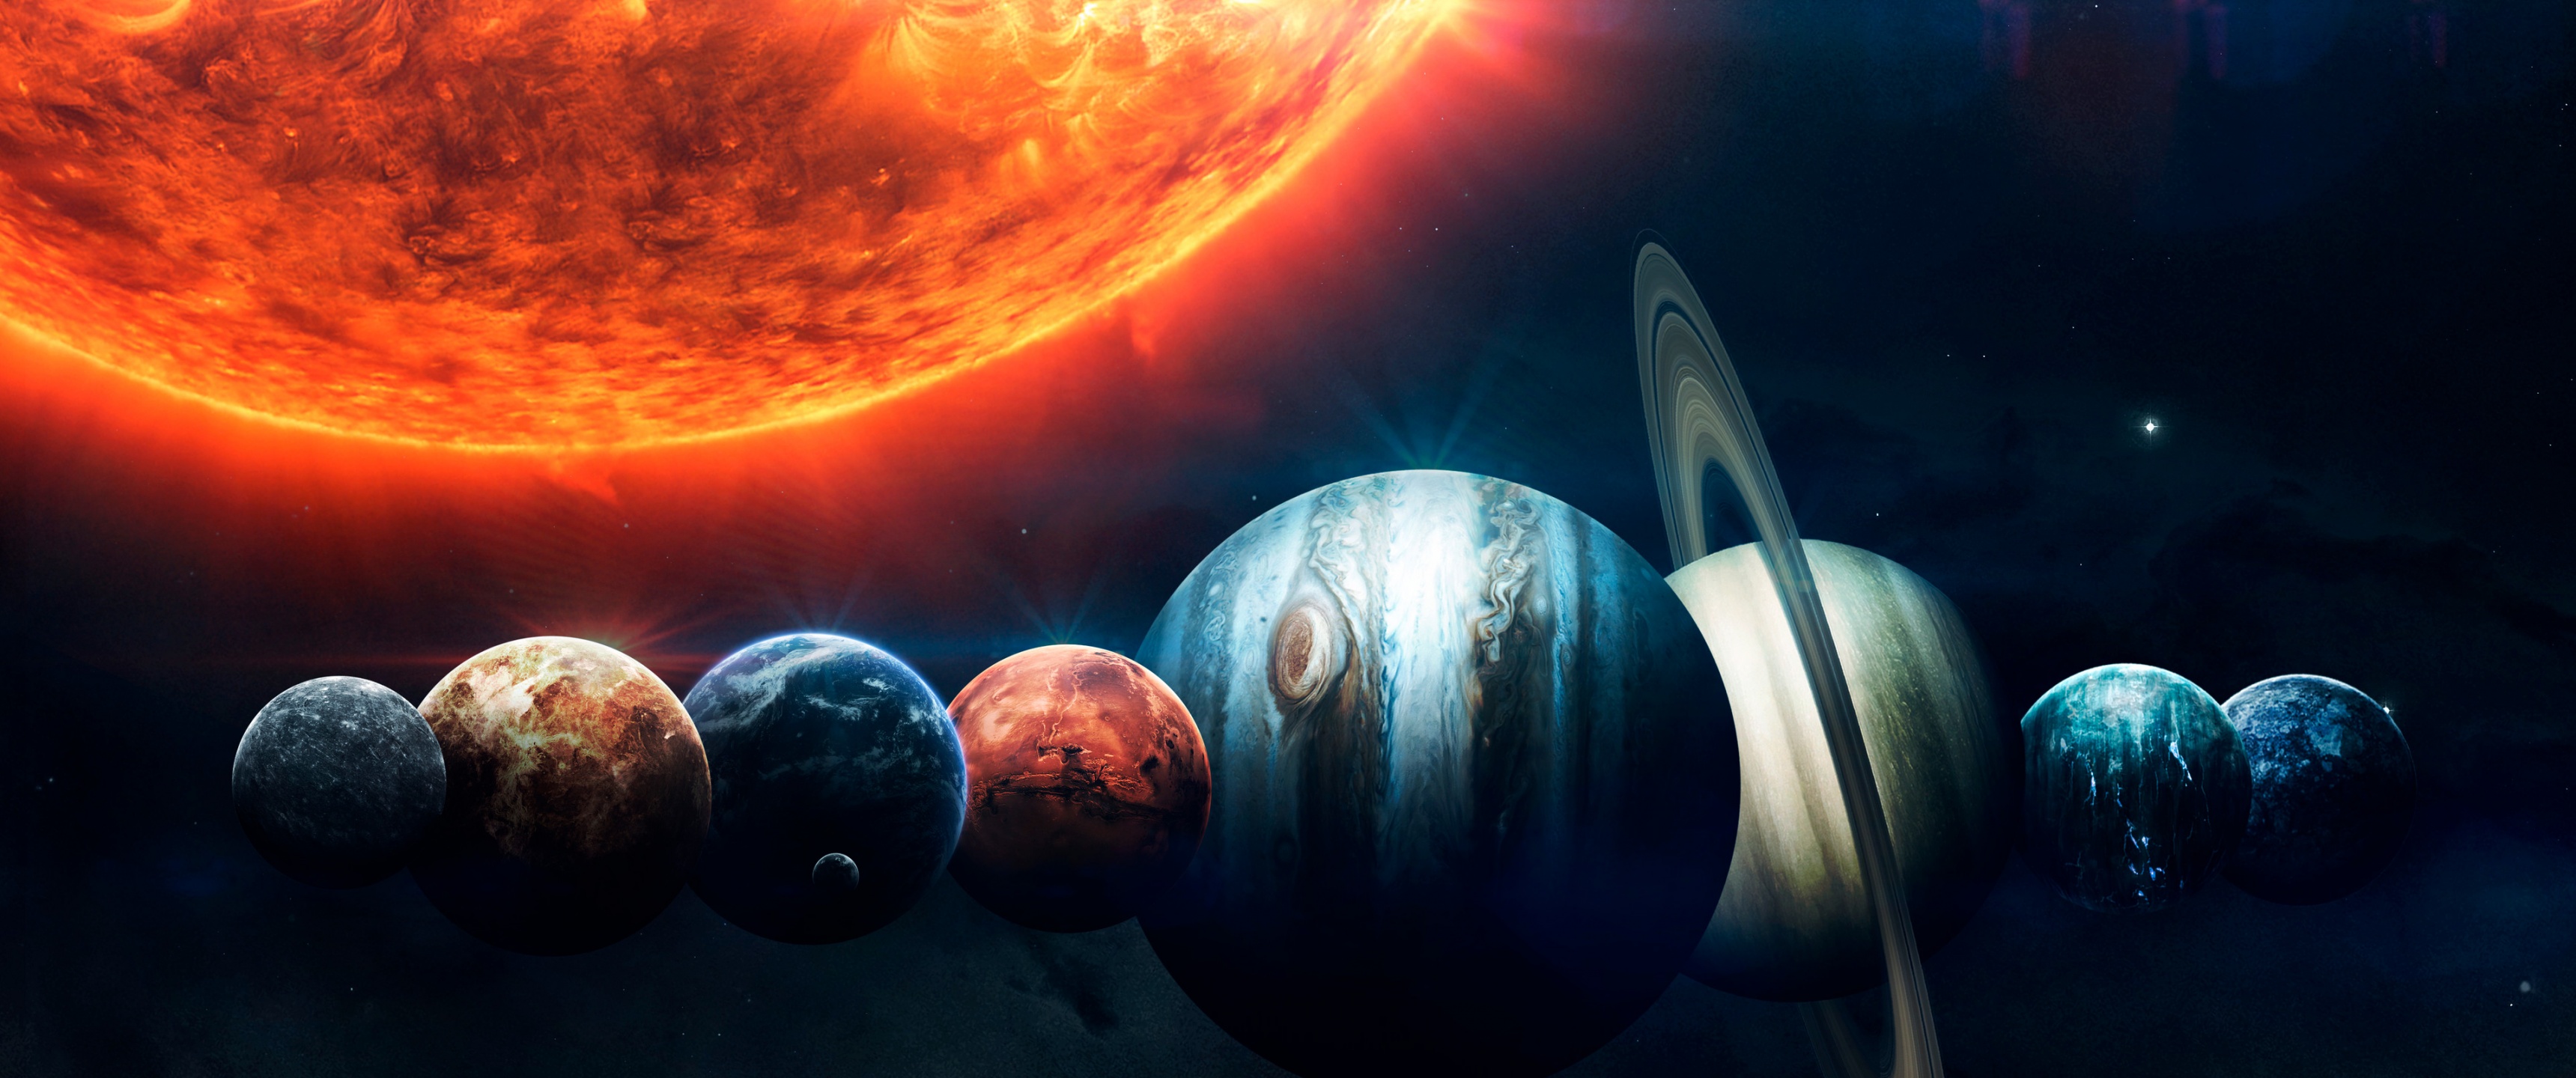 440+ 4K Planet Wallpapers